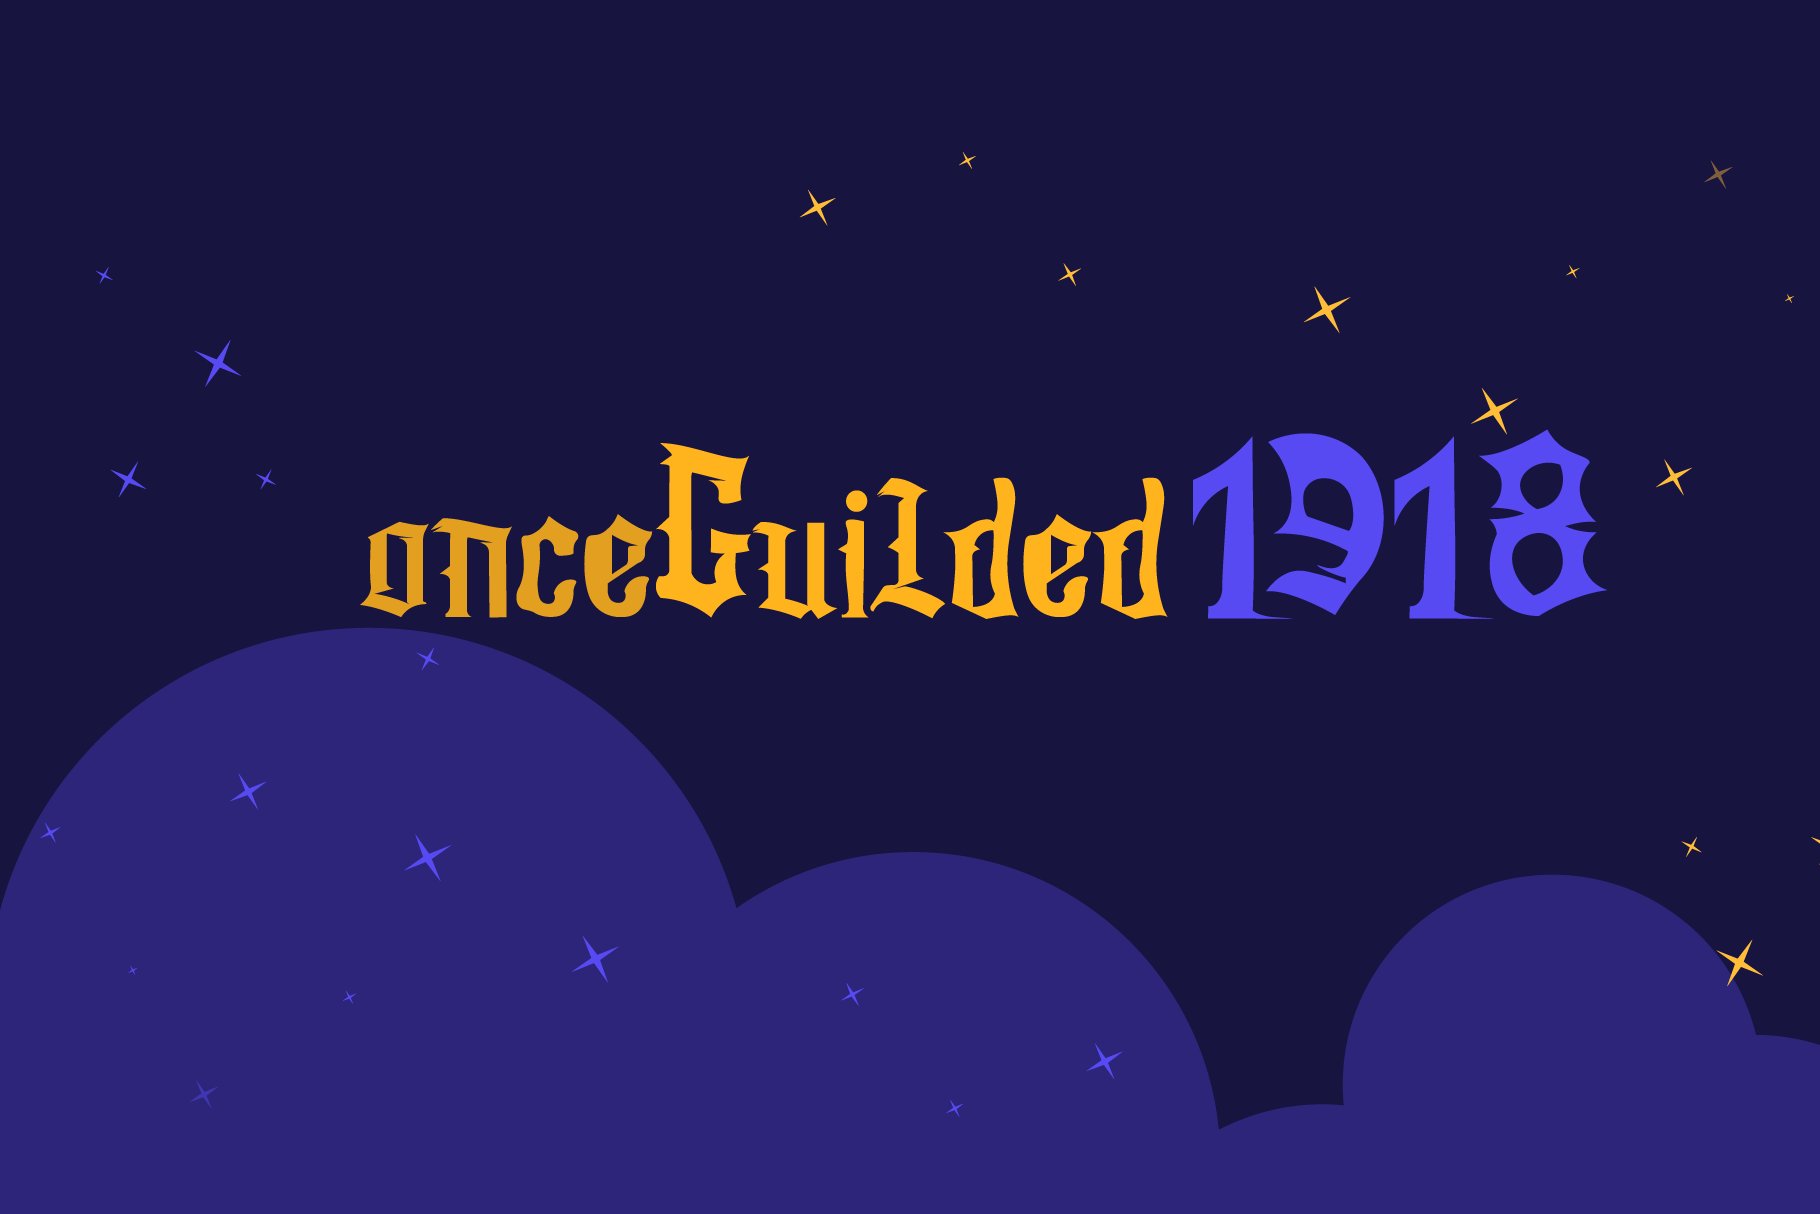 onceGuilded 1918 cover image.